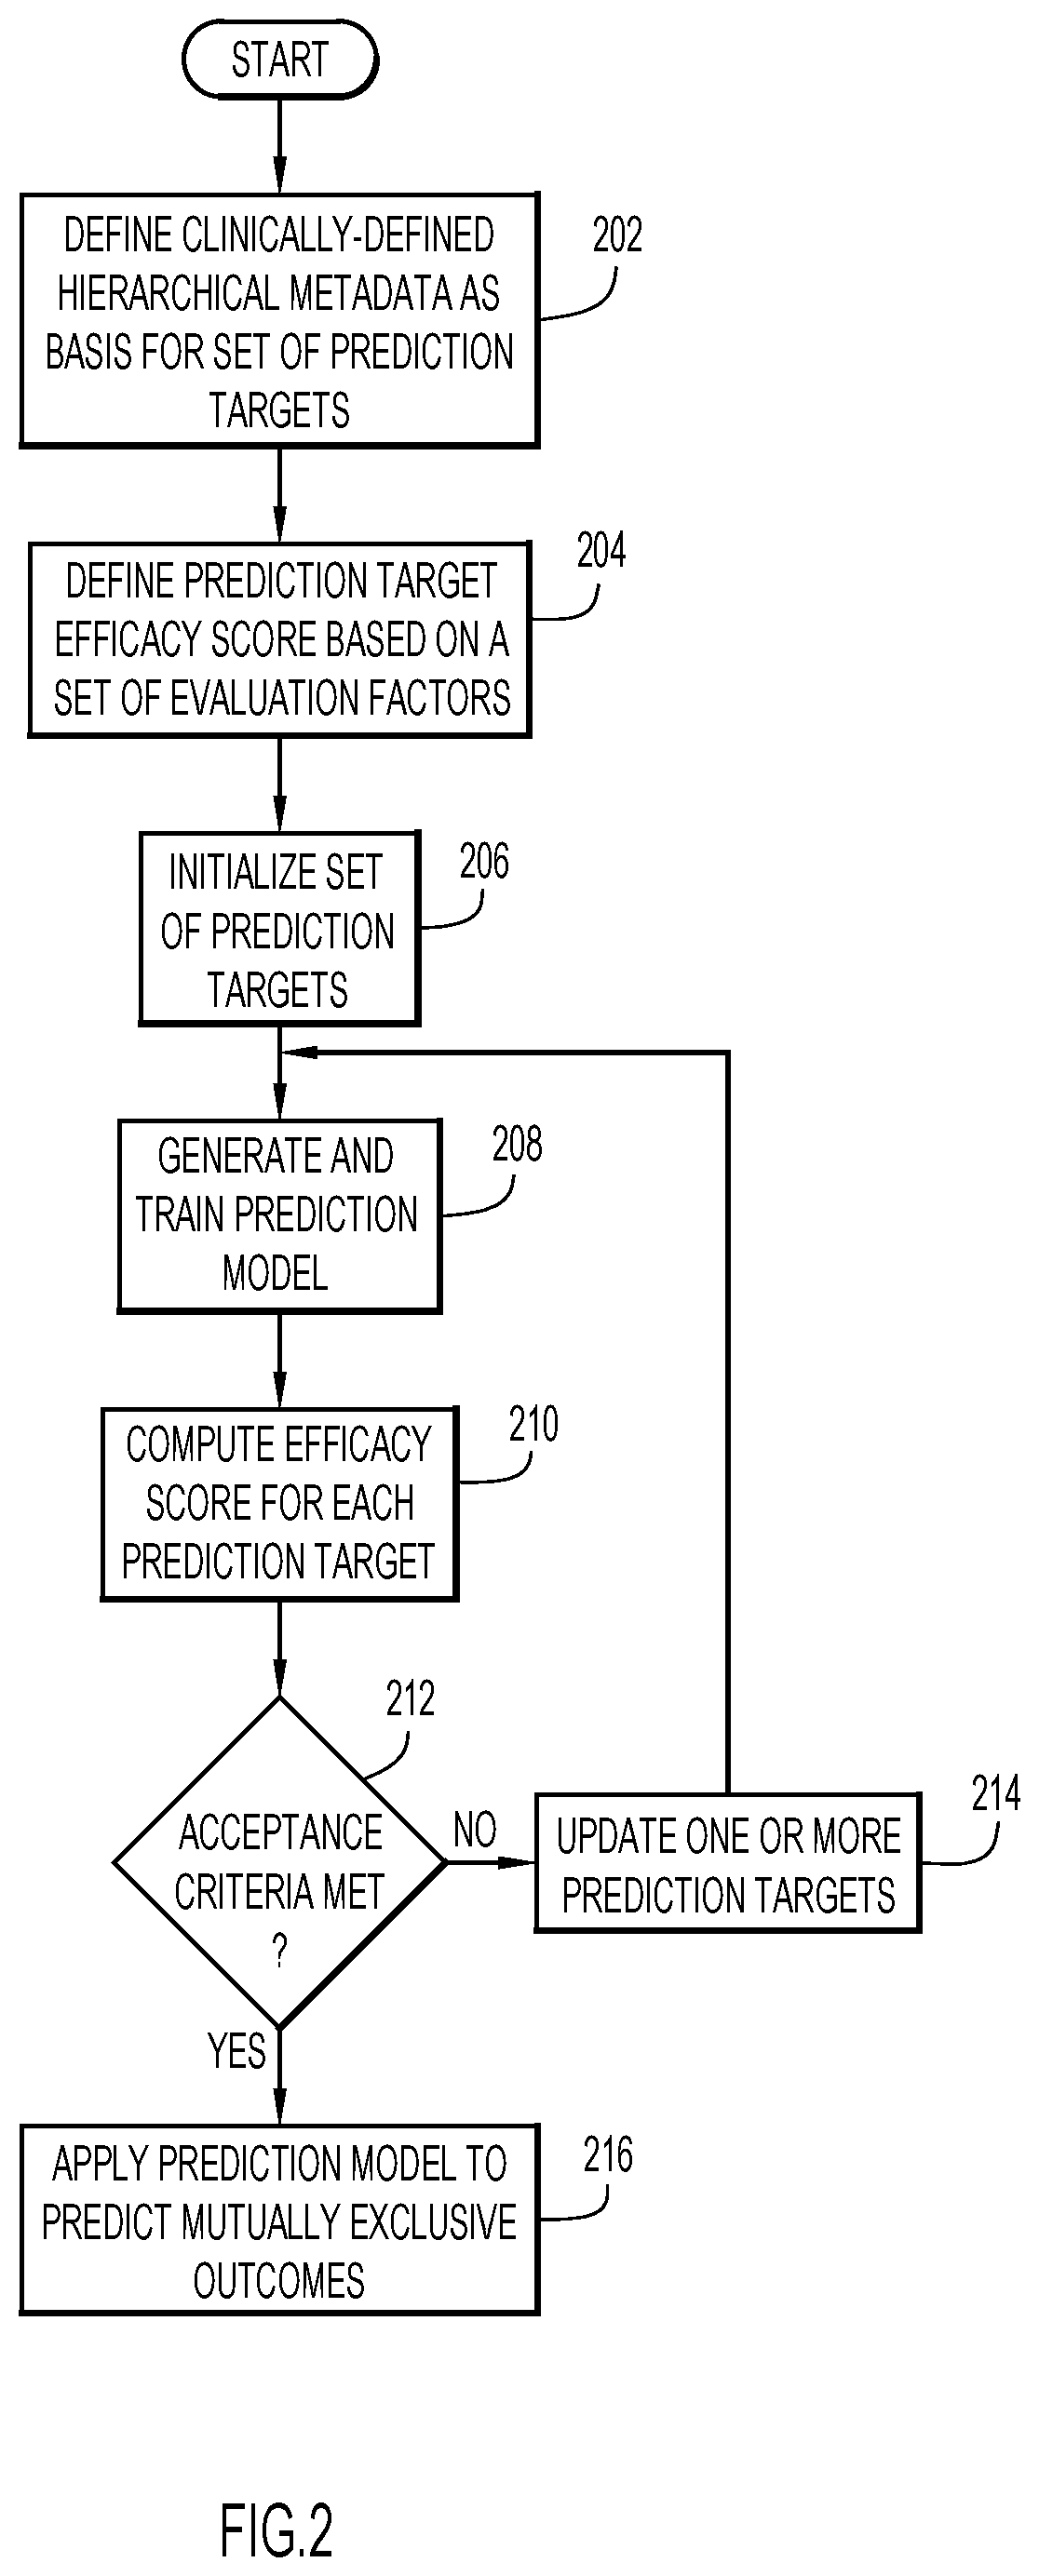 Constructing prediction targets from a clinically-defined hierarchy